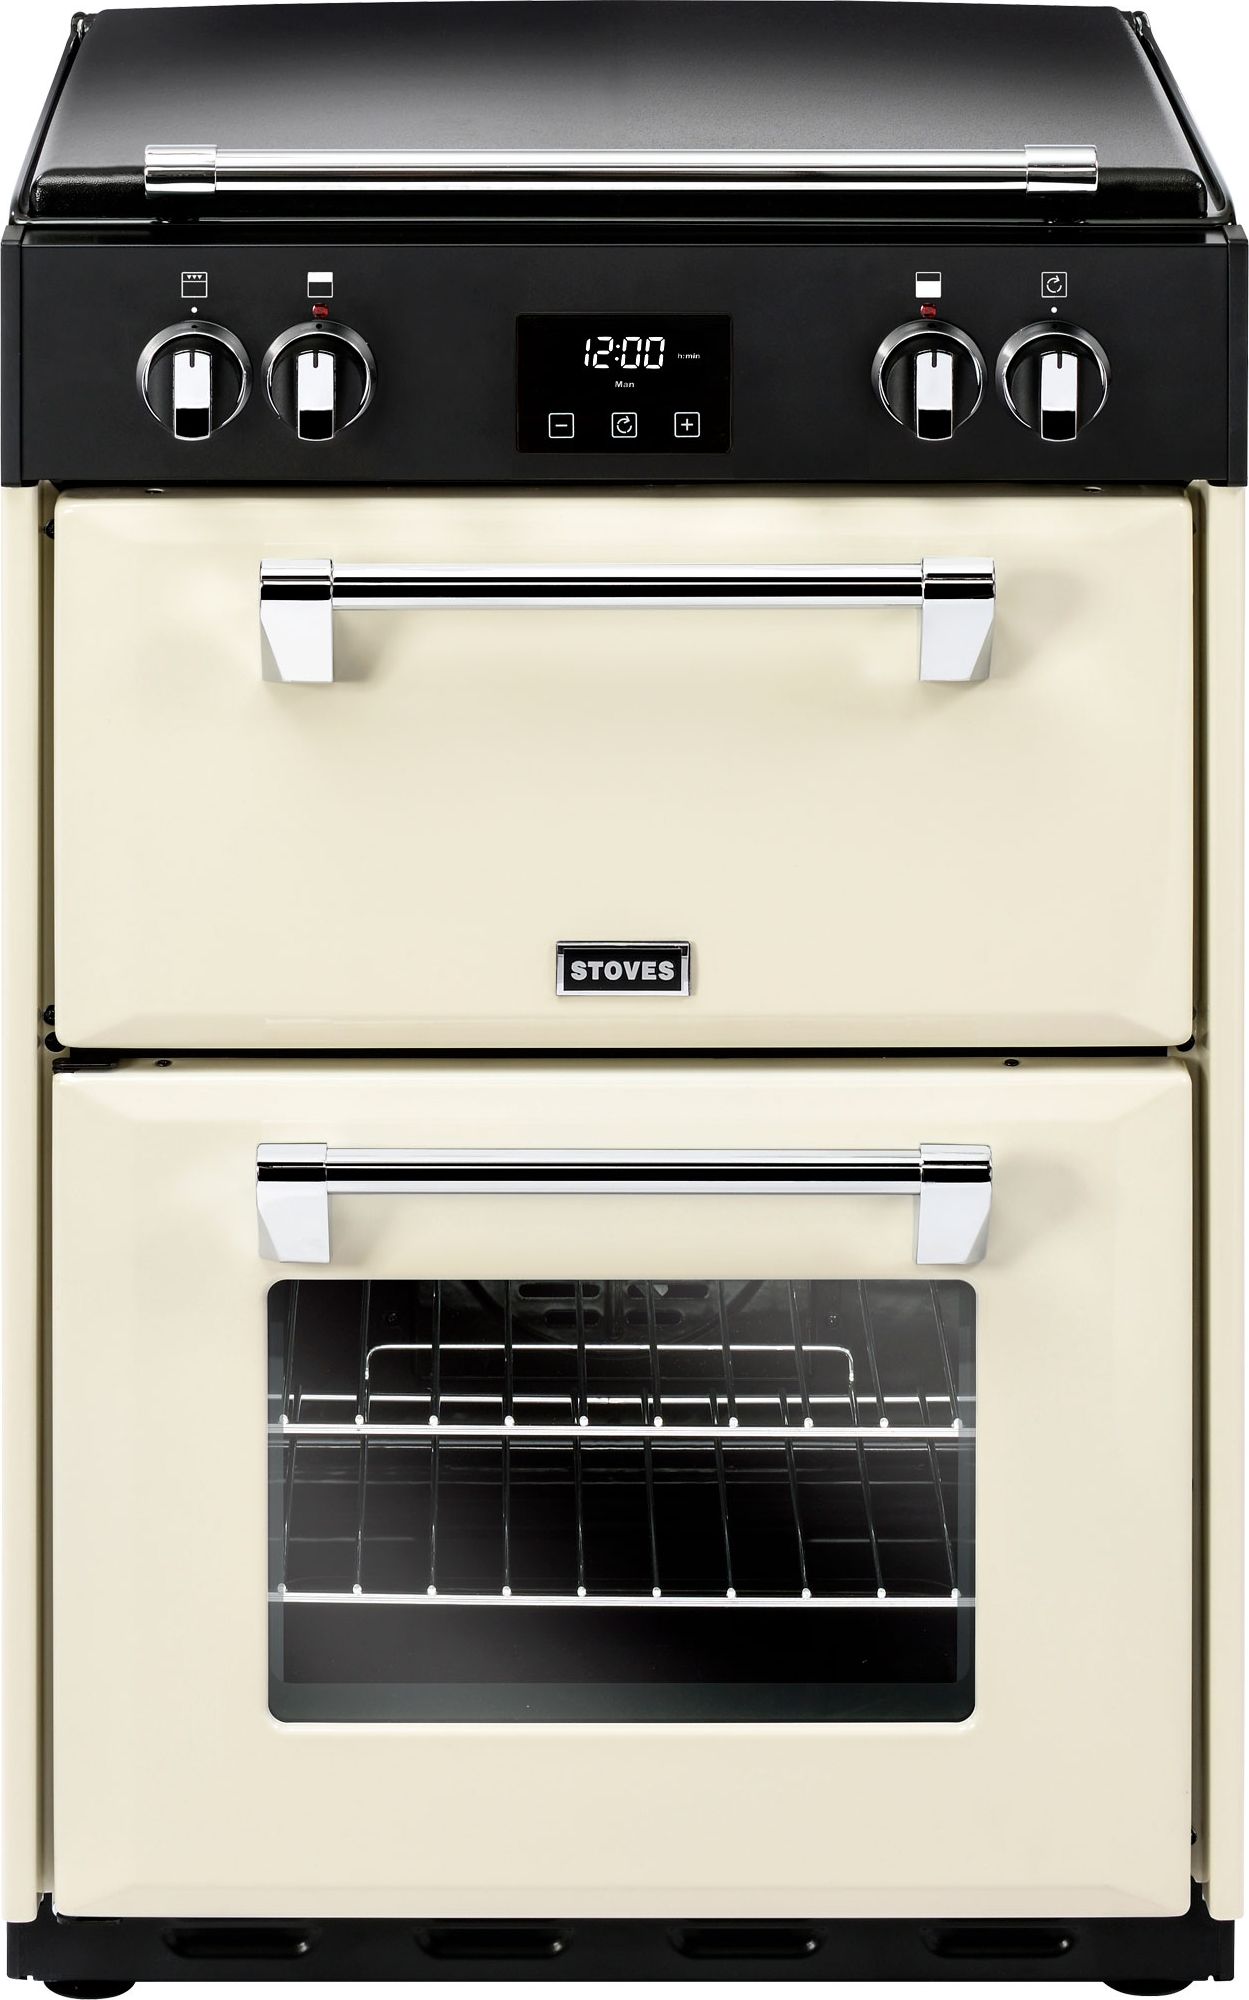 Stoves Richmond600Ei 60cm Electric Cooker with Induction Hob - Cream - A/A Rated, Cream